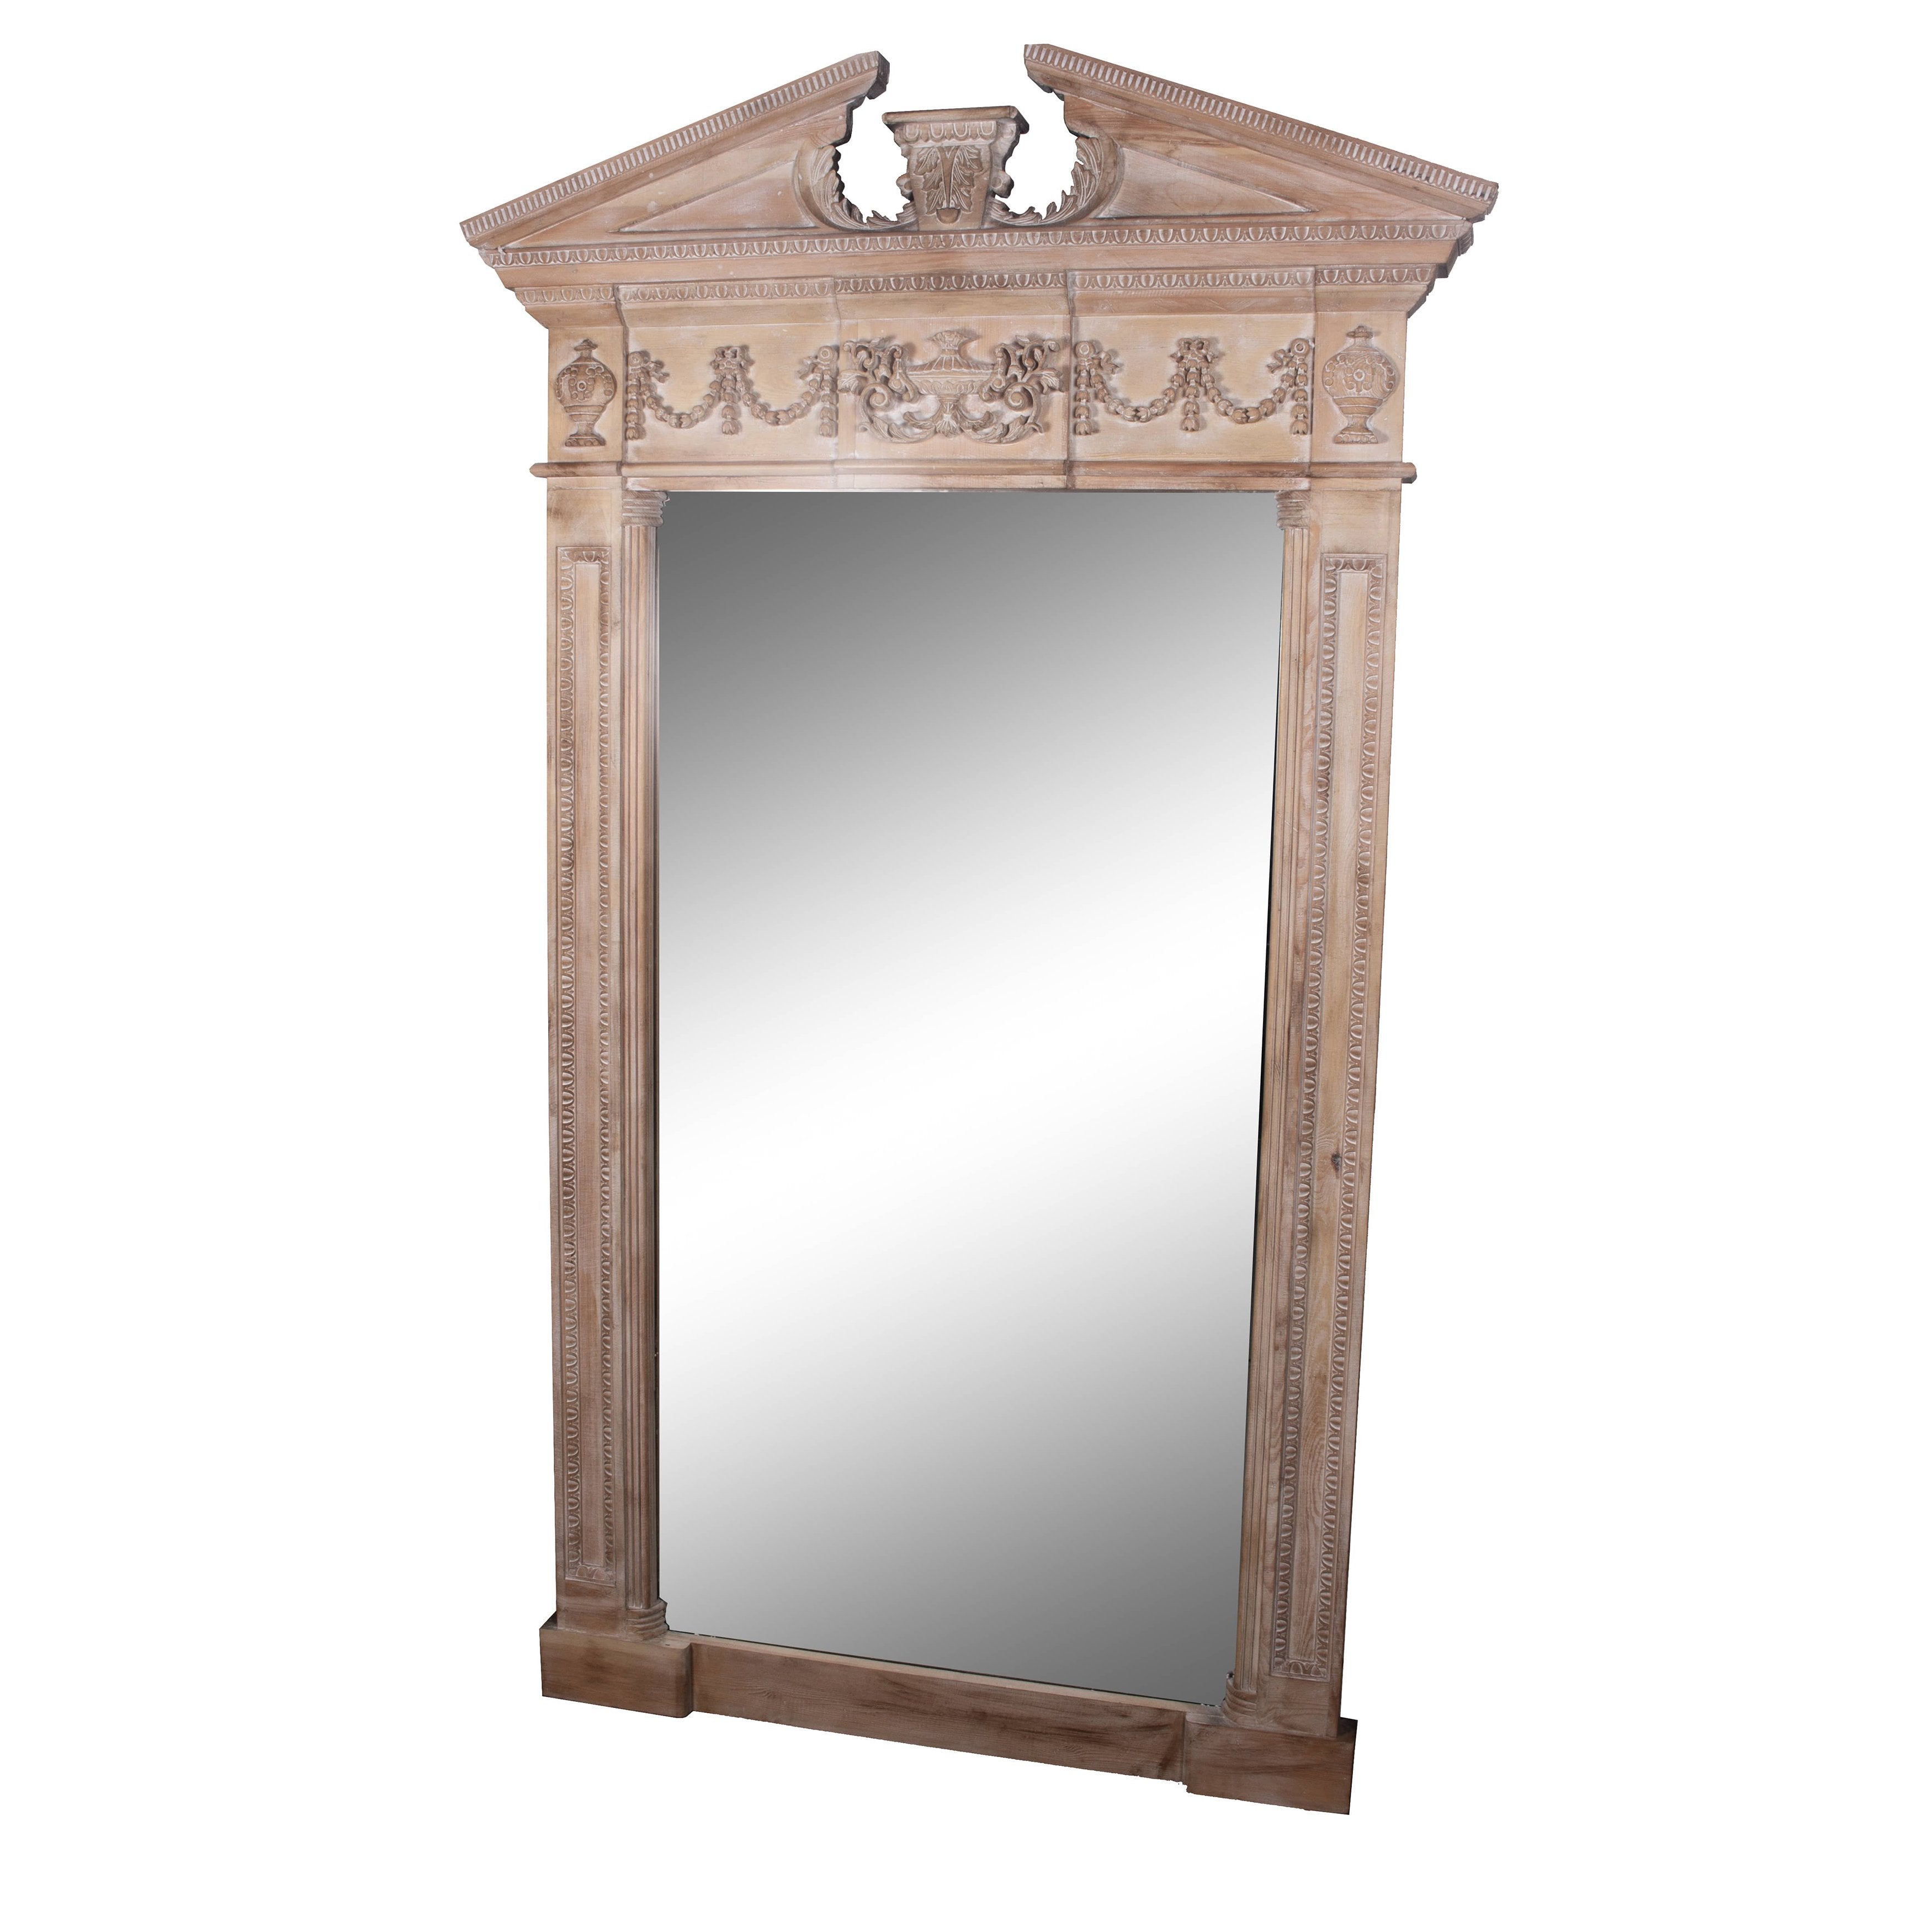 Large Hand-Carved Modern Wood Mirror - Italian Concept